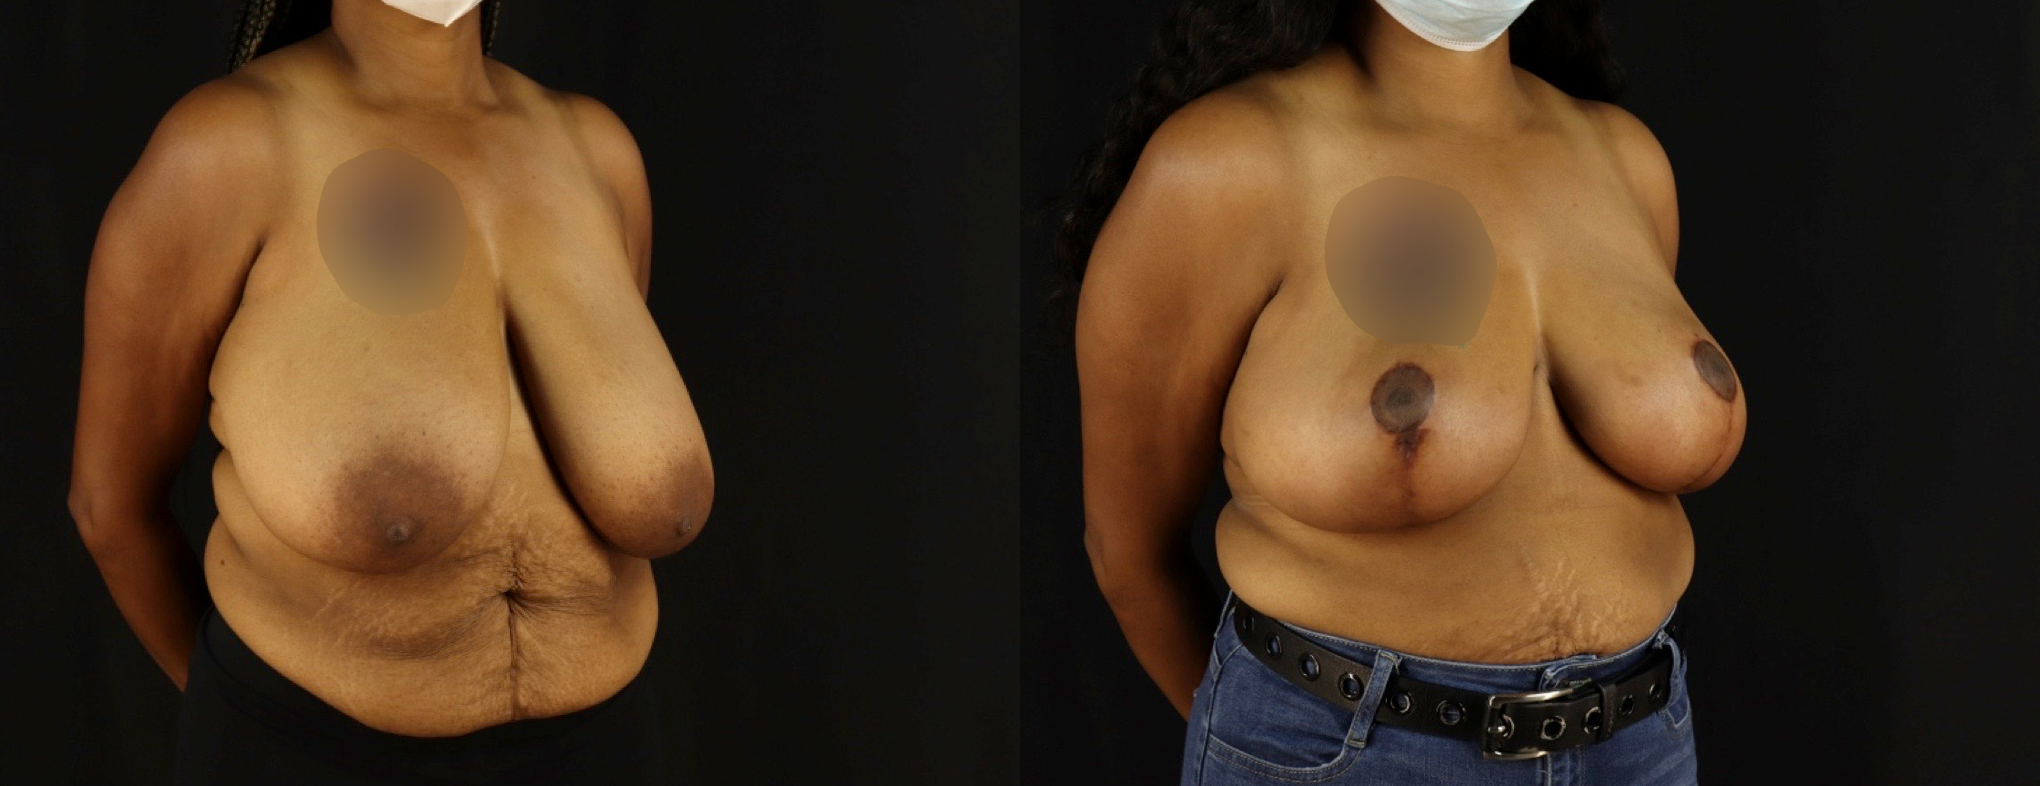 Breast Reduction before and after photo by Dr. Erika A. Sato in Houston TX